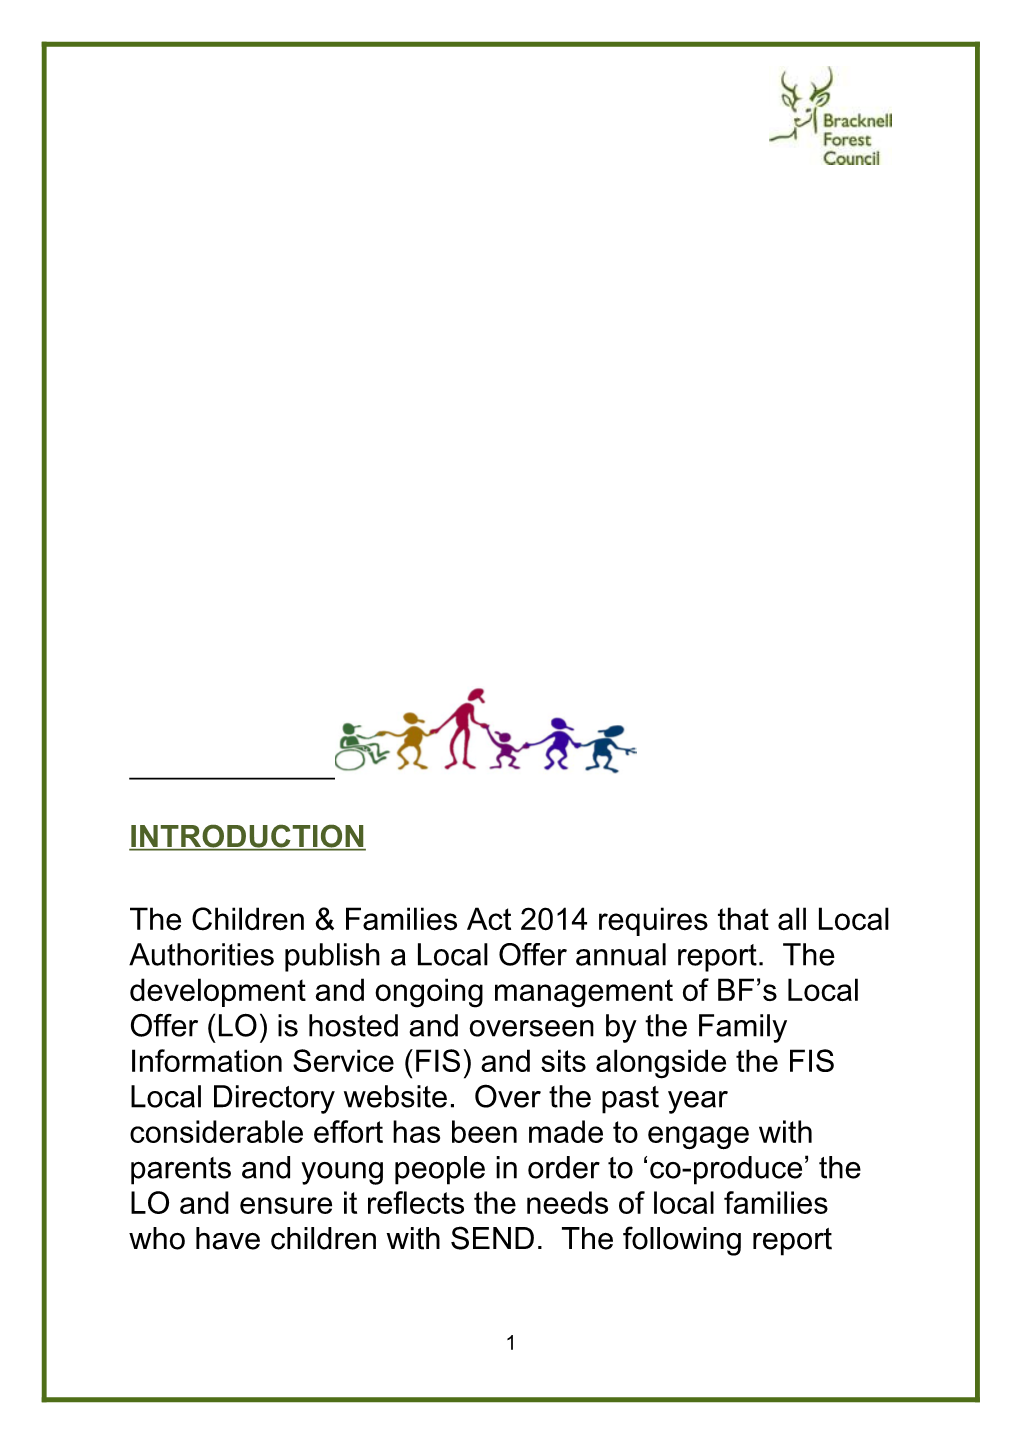 The Children & Families Act 2014 Requires That All Local Authorities Publish a Local Offer